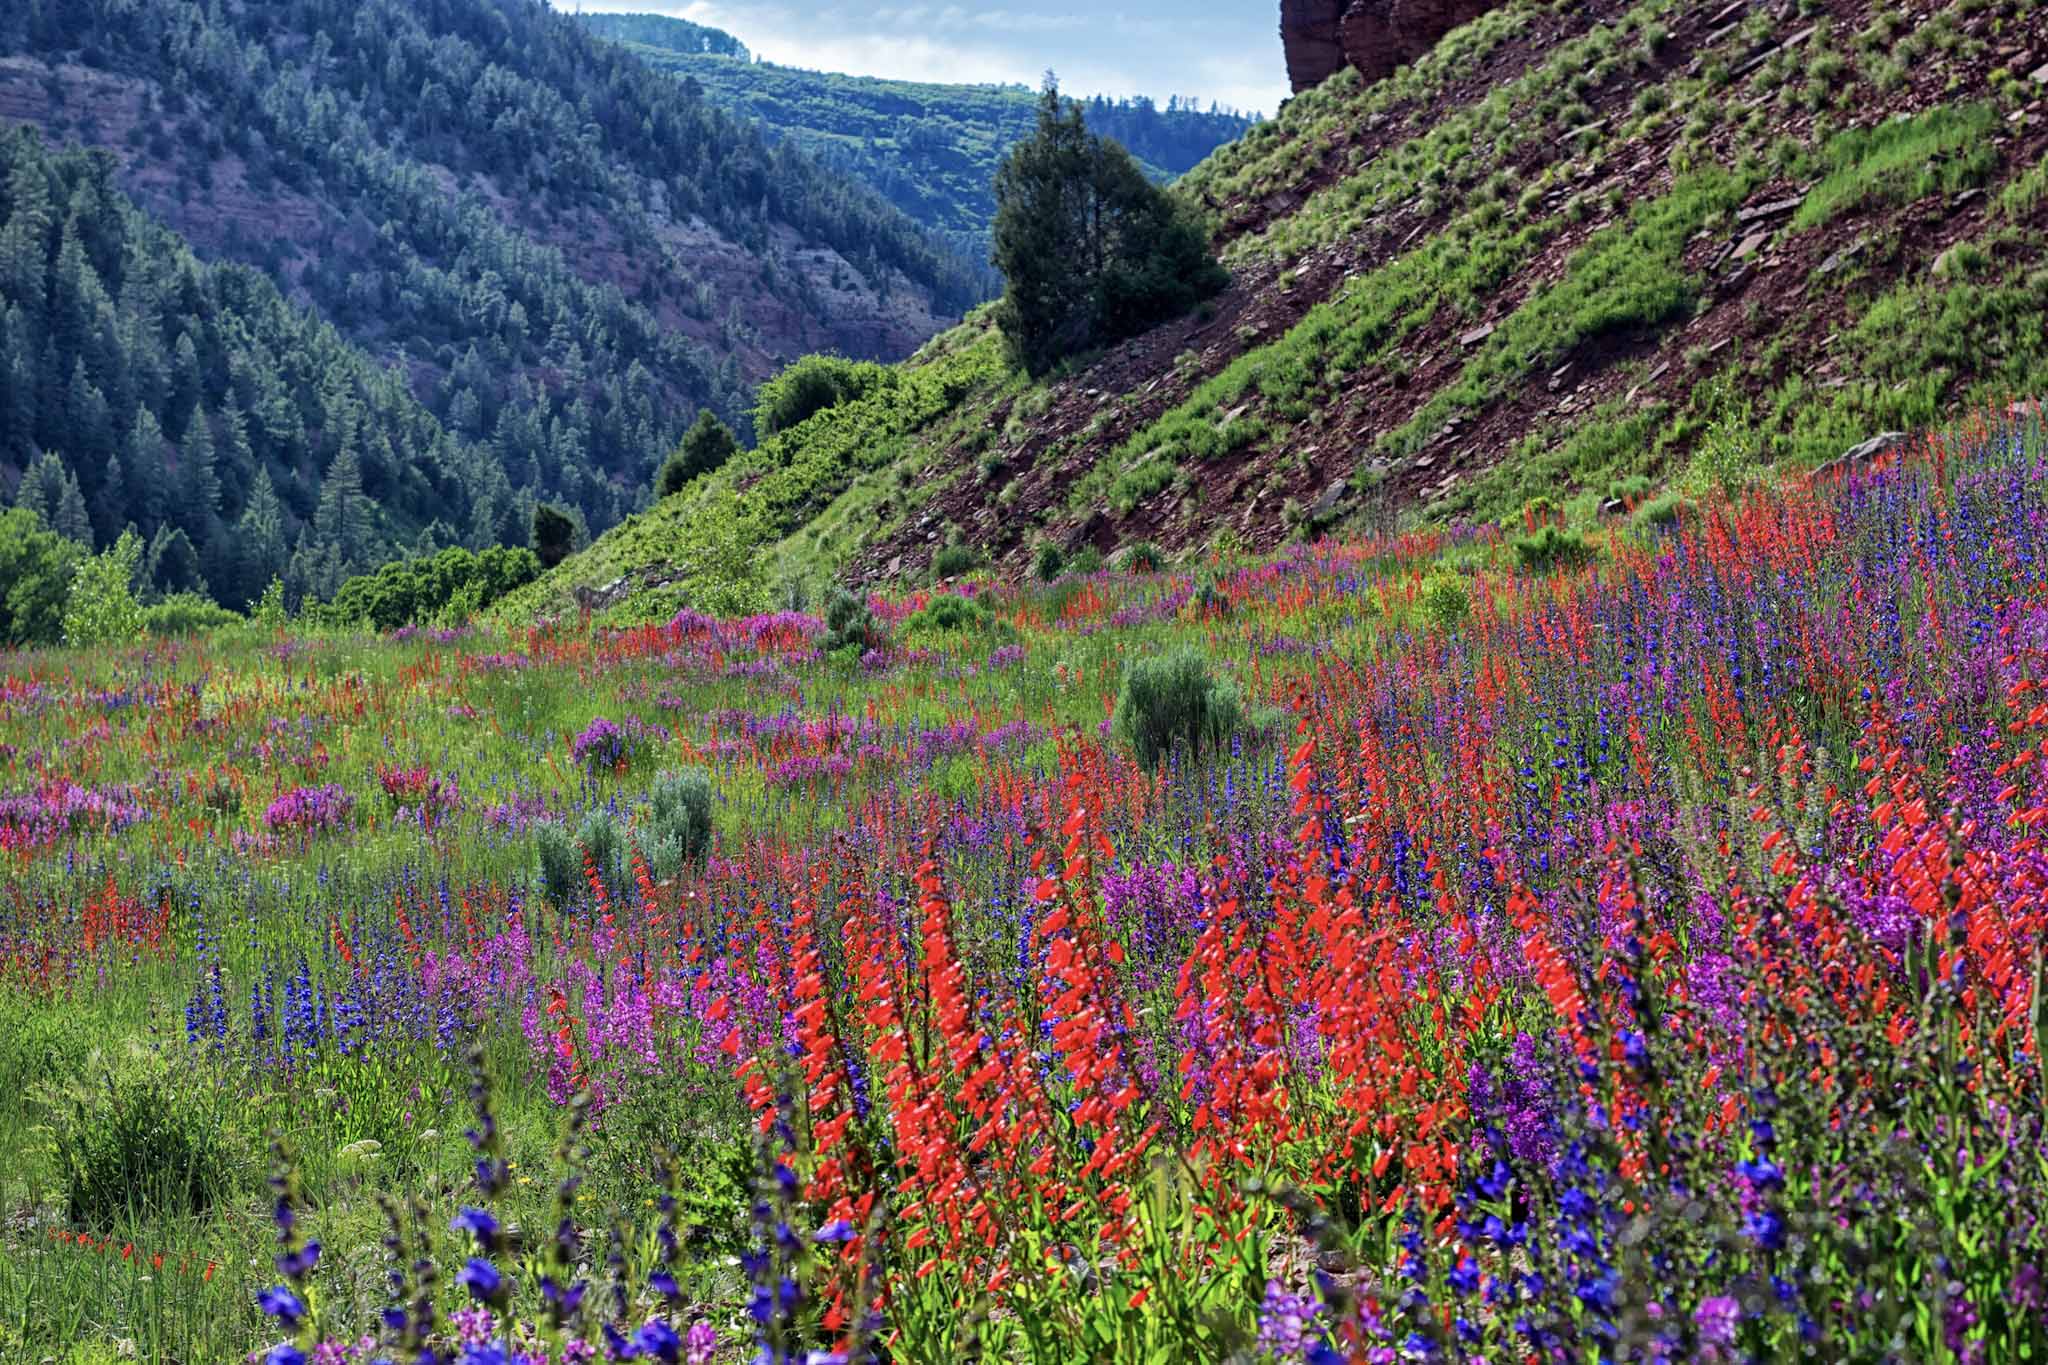 A colorful picture of wild flowers in the Telluride Mountains